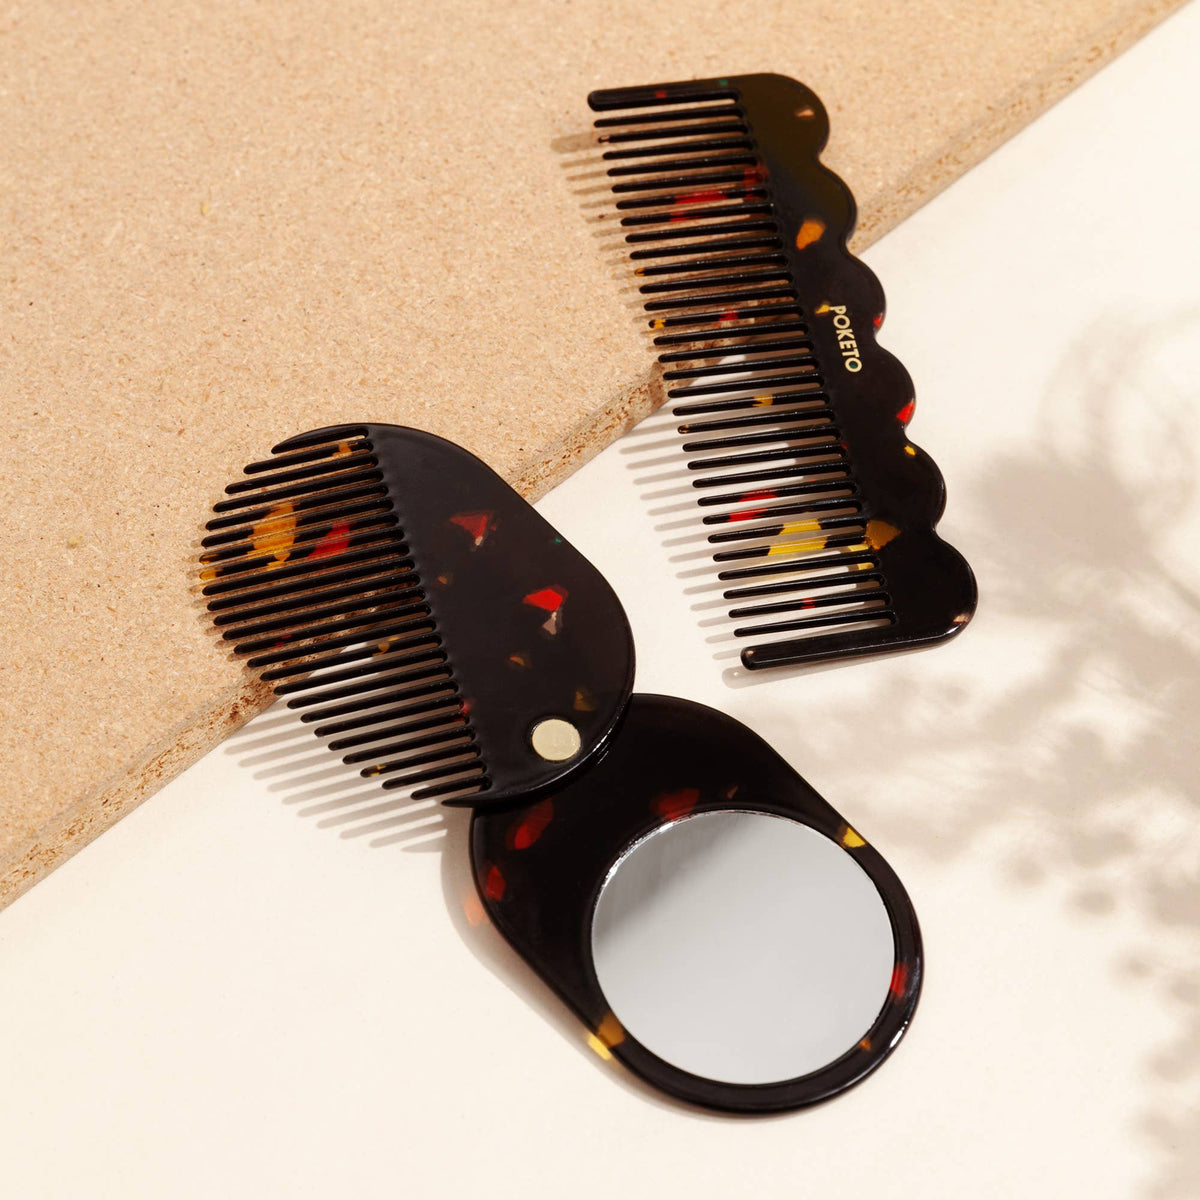 2 in 1 Pocket Comb Mirror in Black Amber